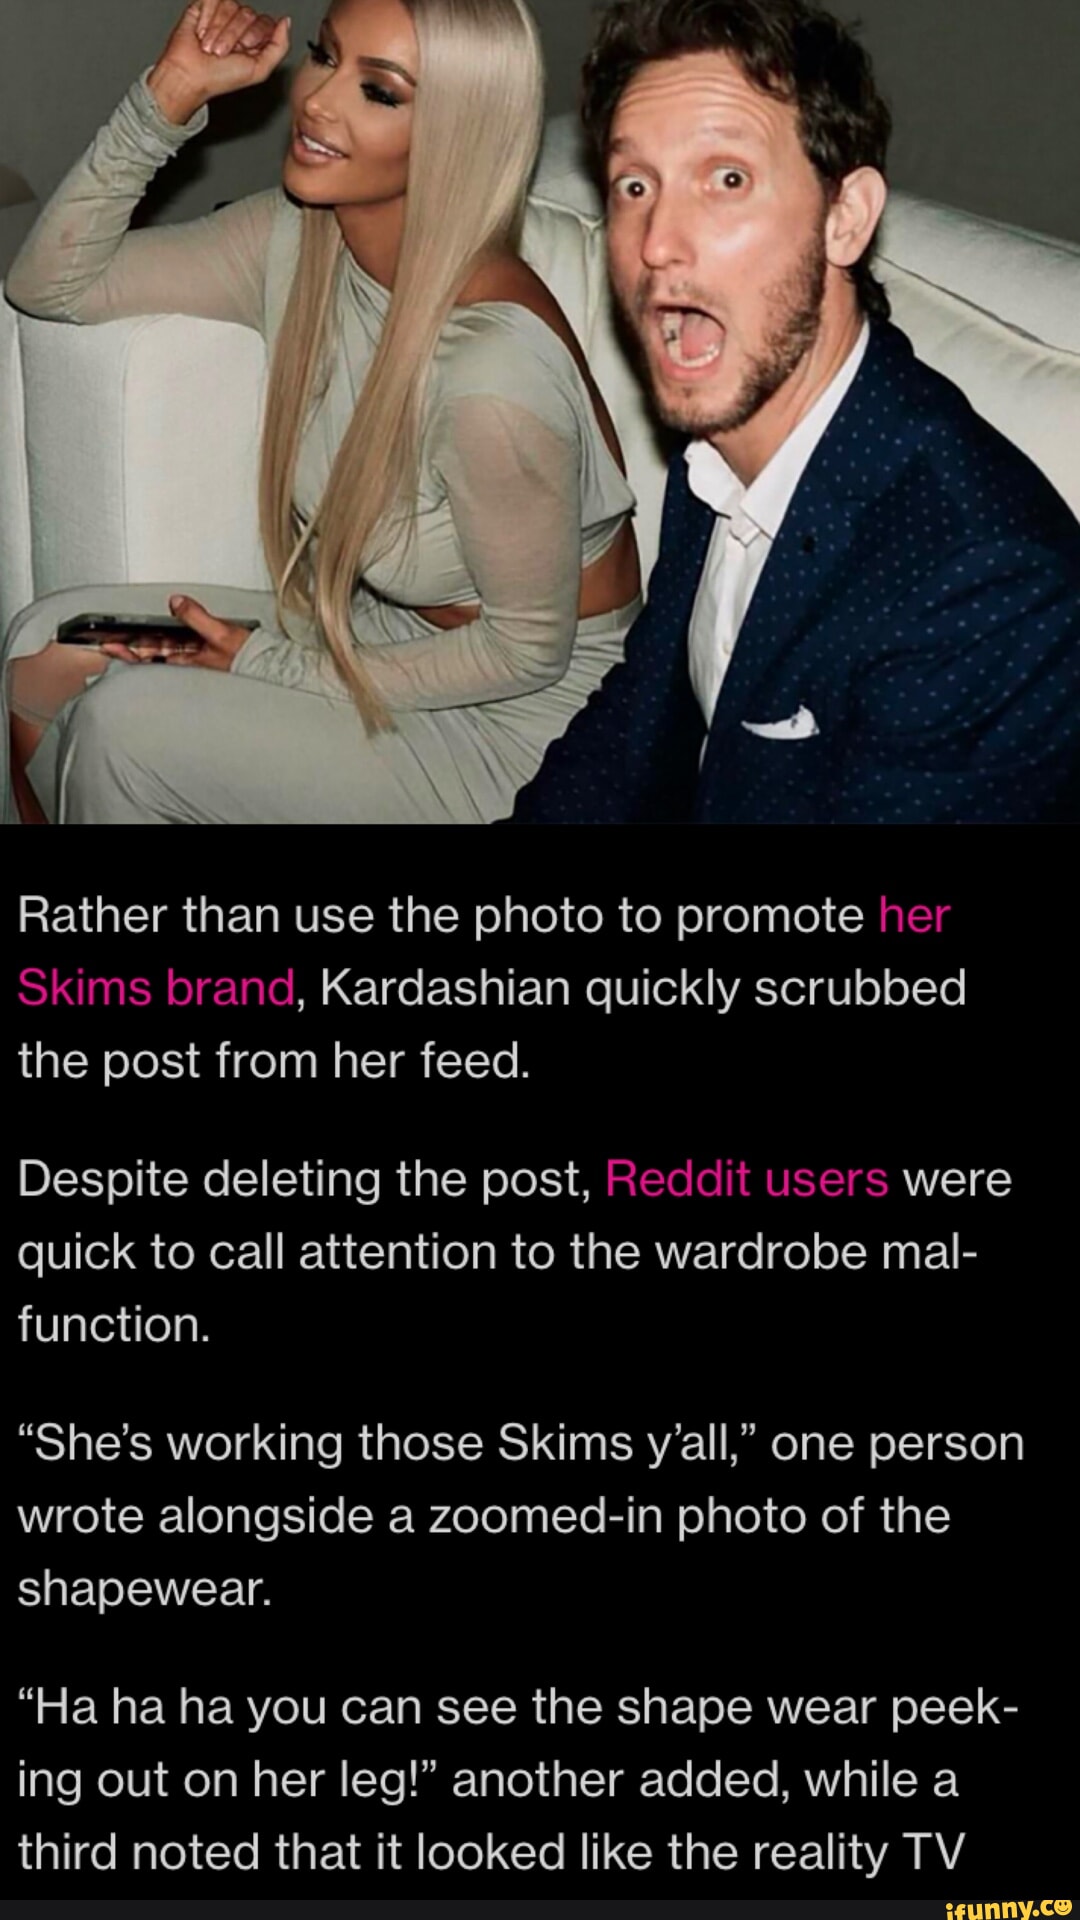 Rather than use the photo to promote her Skims brand, Kardashian quickly  scrubbed the post from